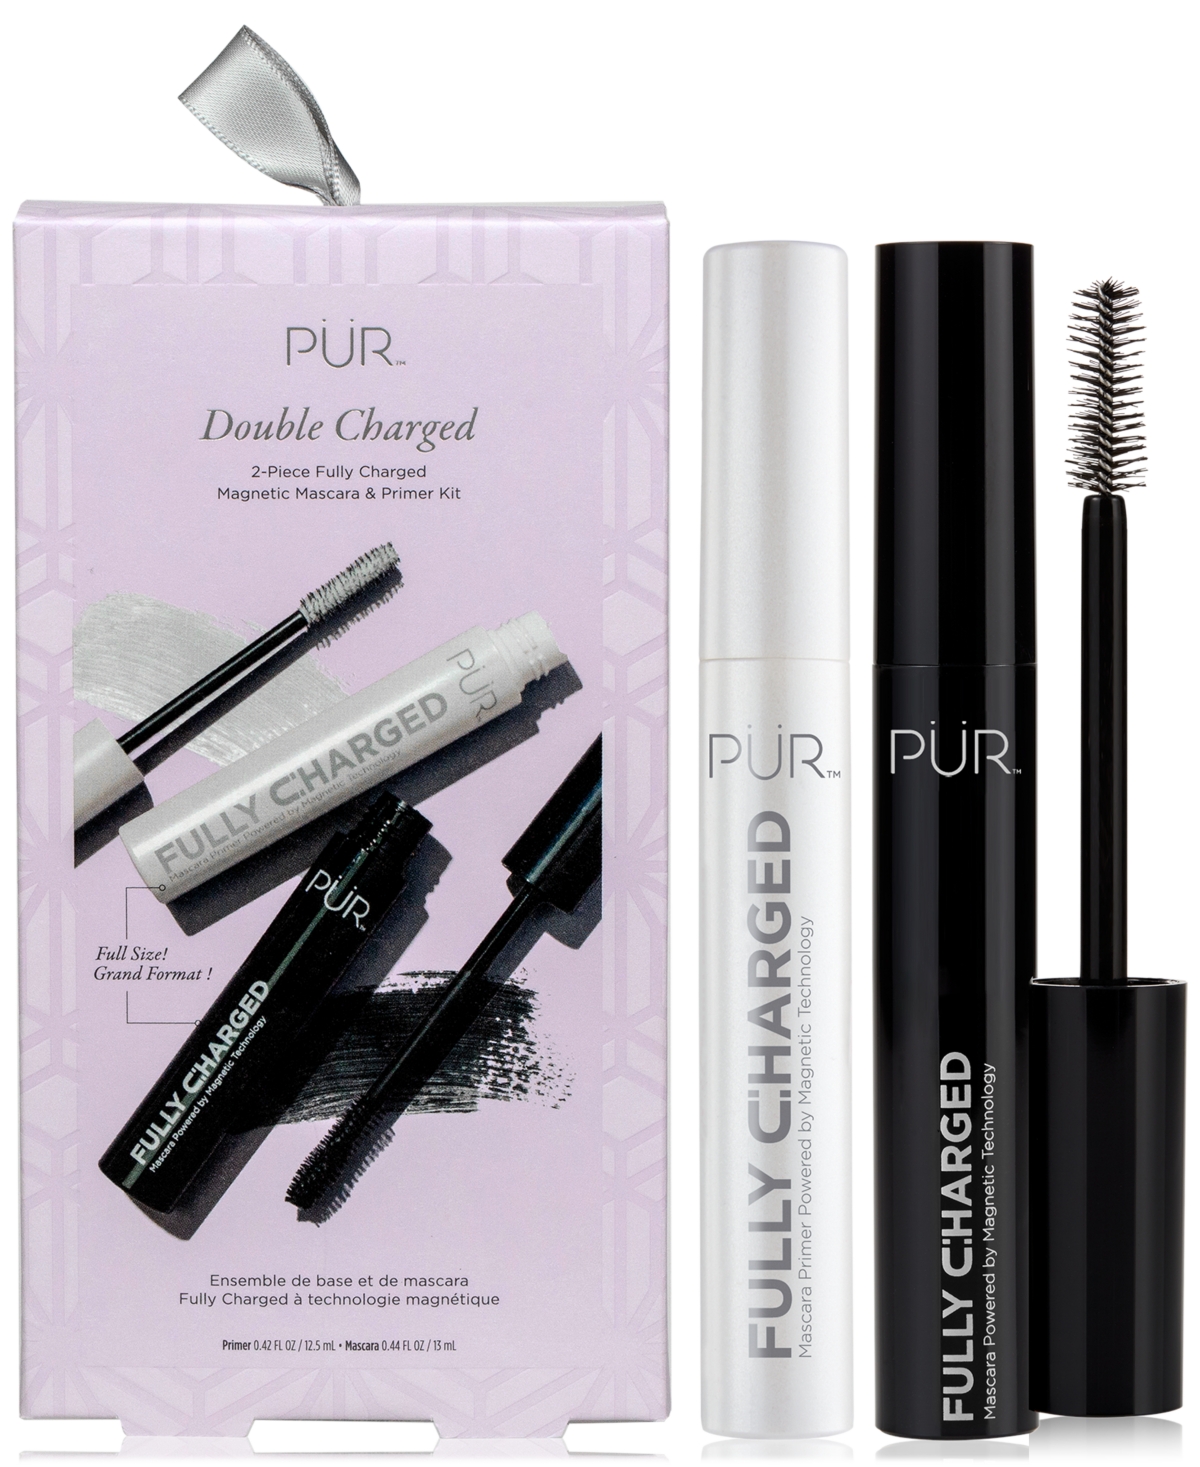 Pür Double Charged 2-piece Fully Charged Magnetic Mascara & Primer Kit In No Color